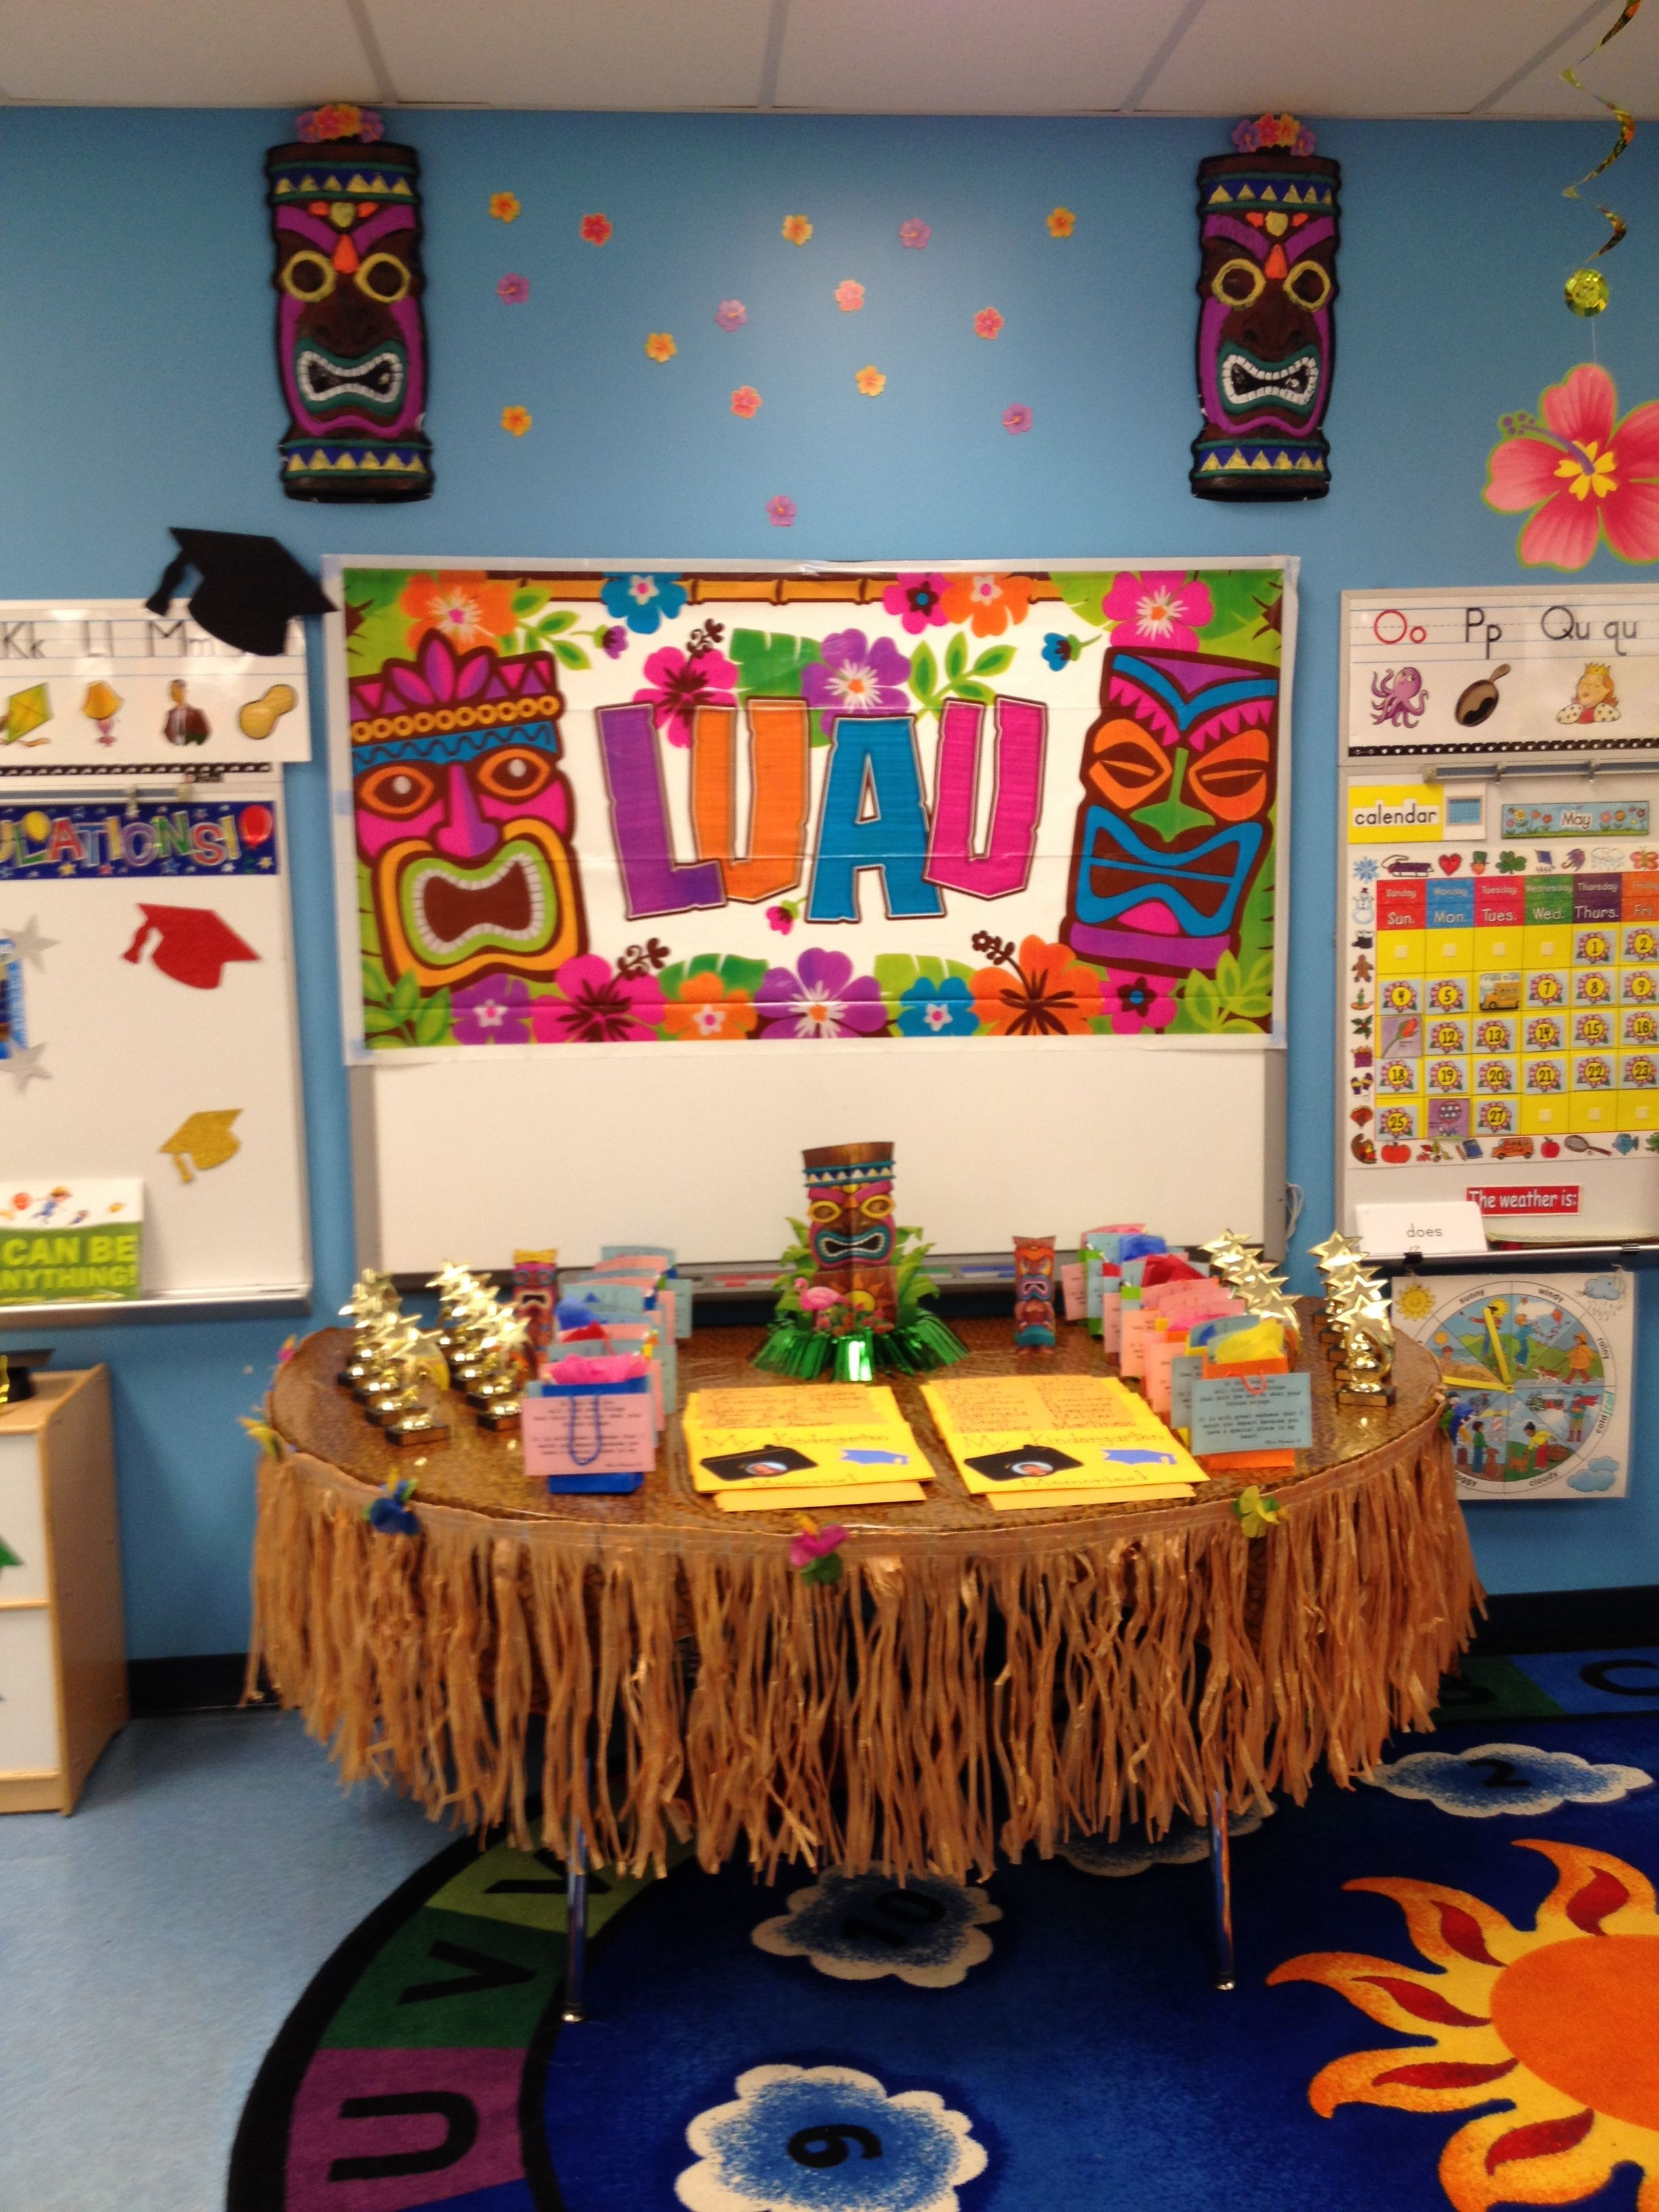 Beach Party Ideas College
 "Luau" end of the year celebration